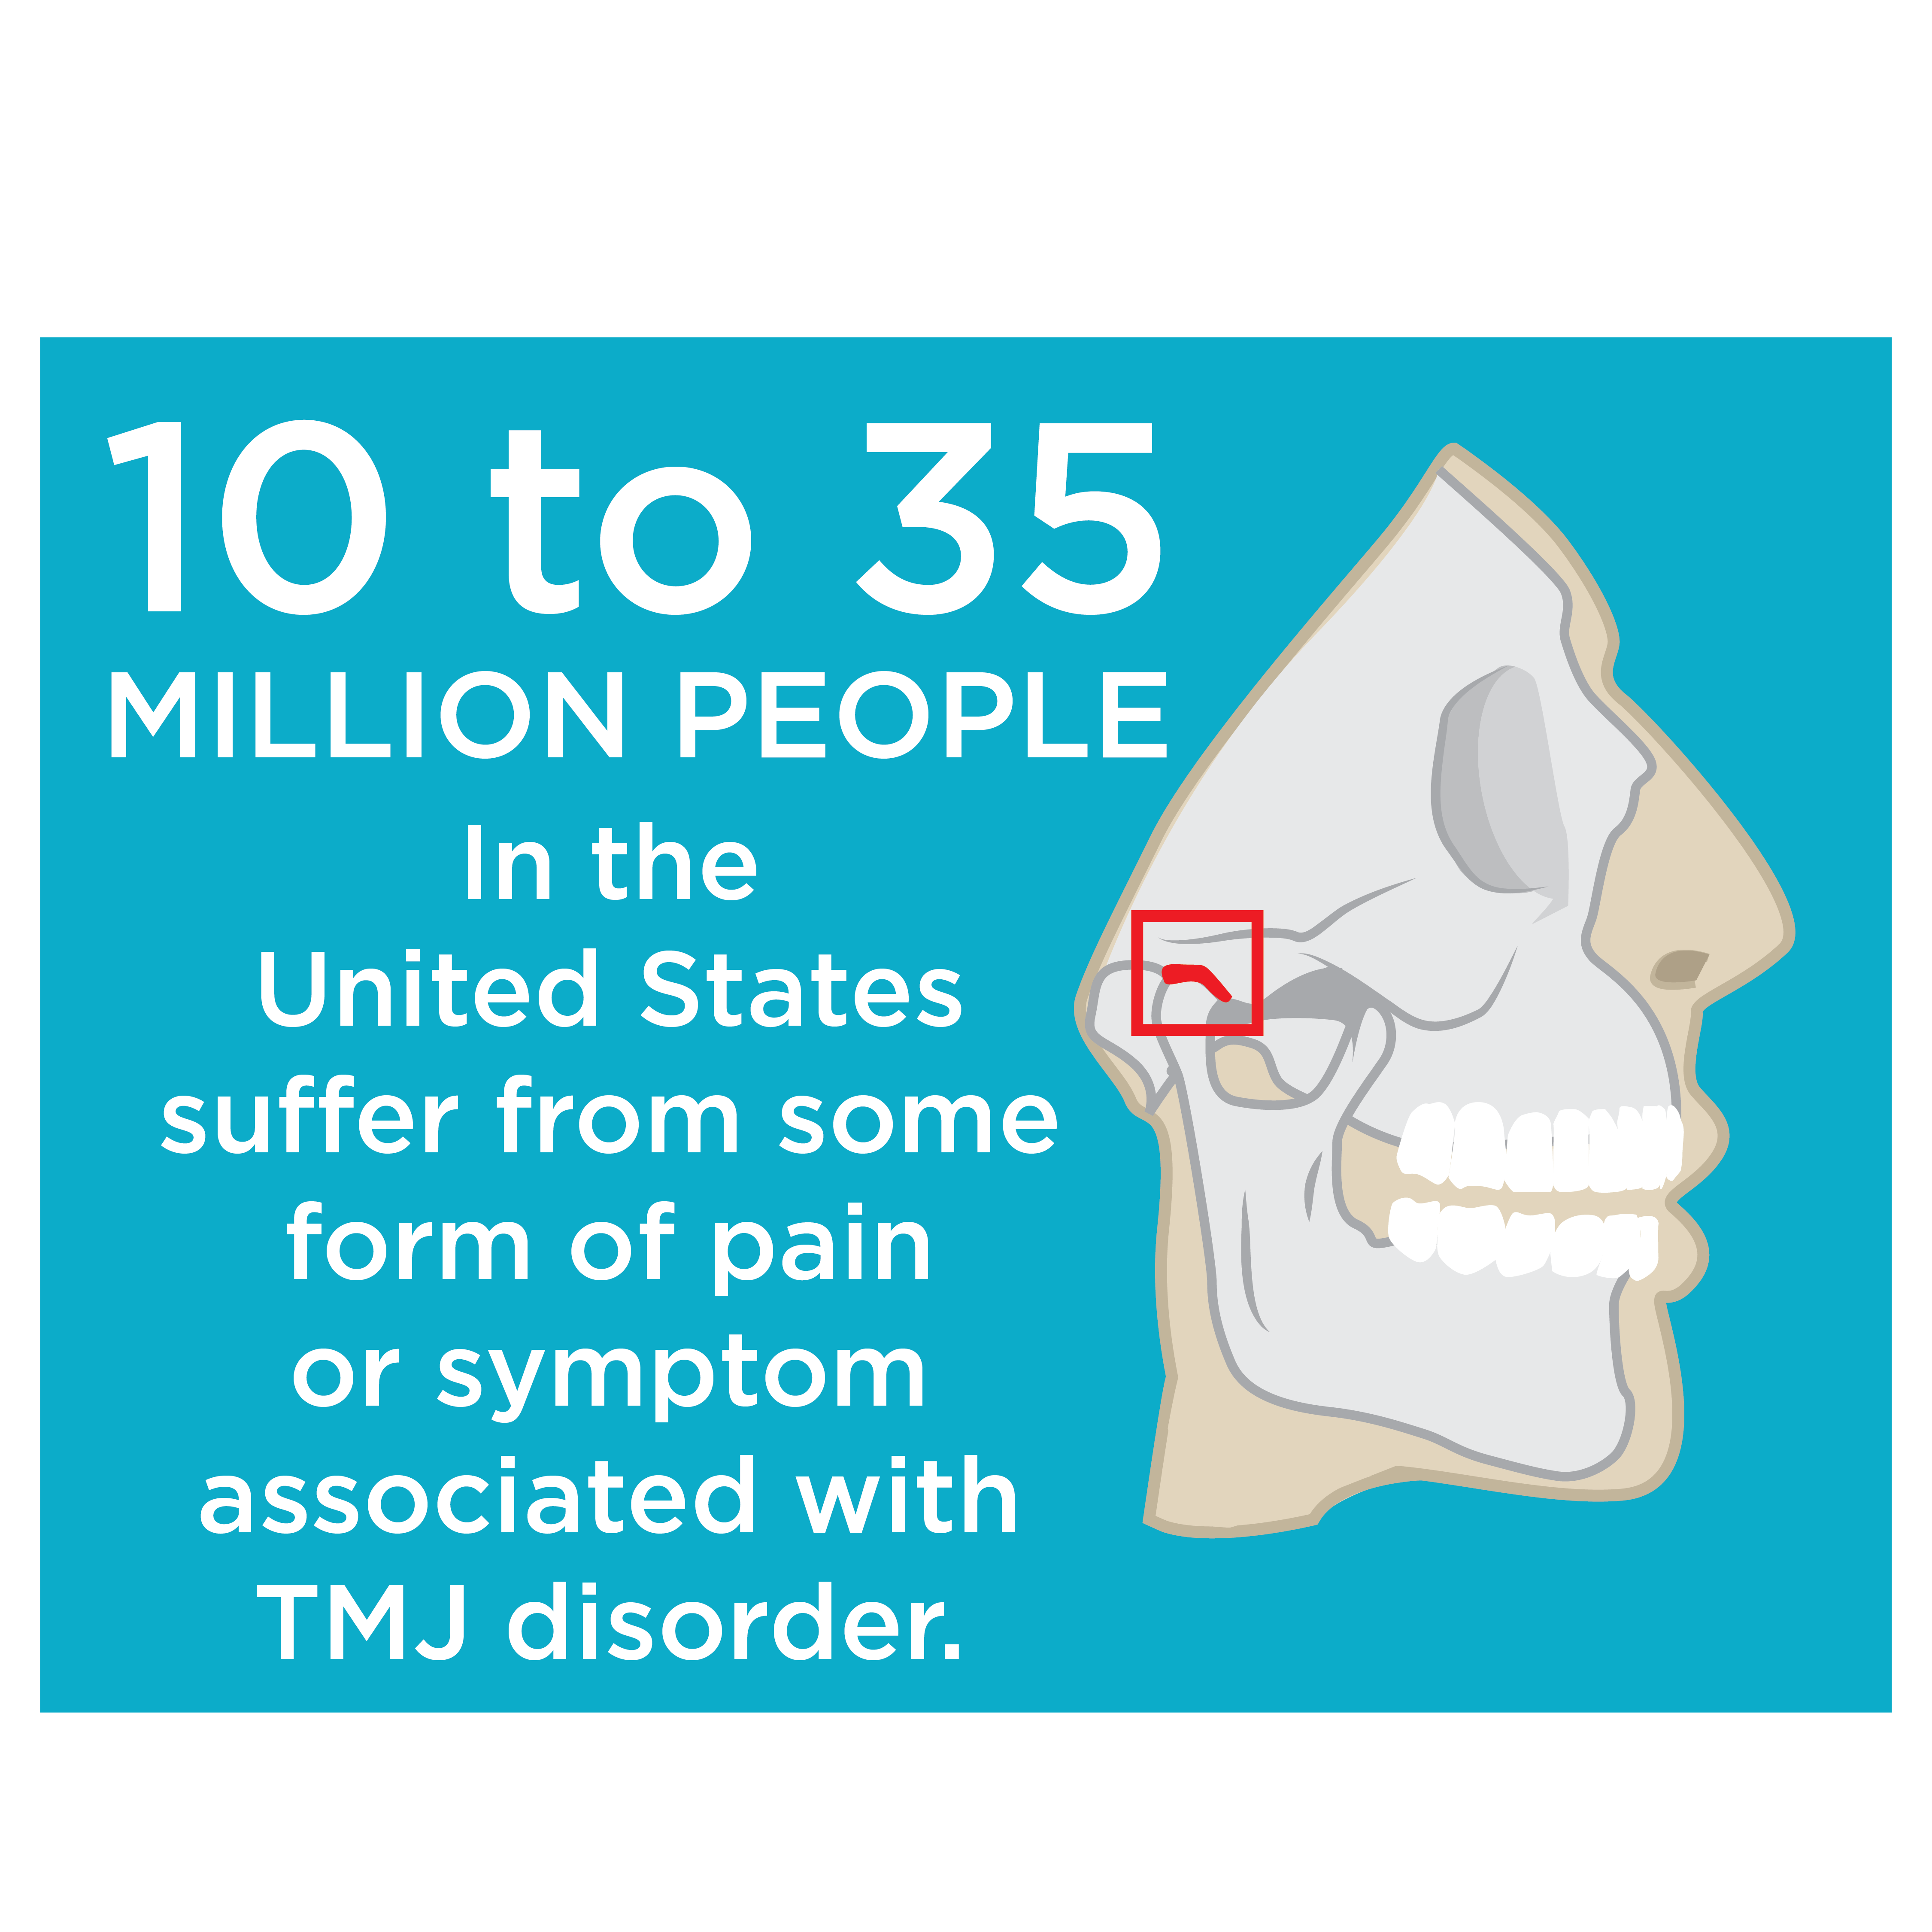 Infographic that shows a picture of a skull with a circle around the temporomandibular joint of the jaw. There is text stating, "10 to 35 million people in the Unite States suffer from some form of pain or symptom associated with TMJ disorder."